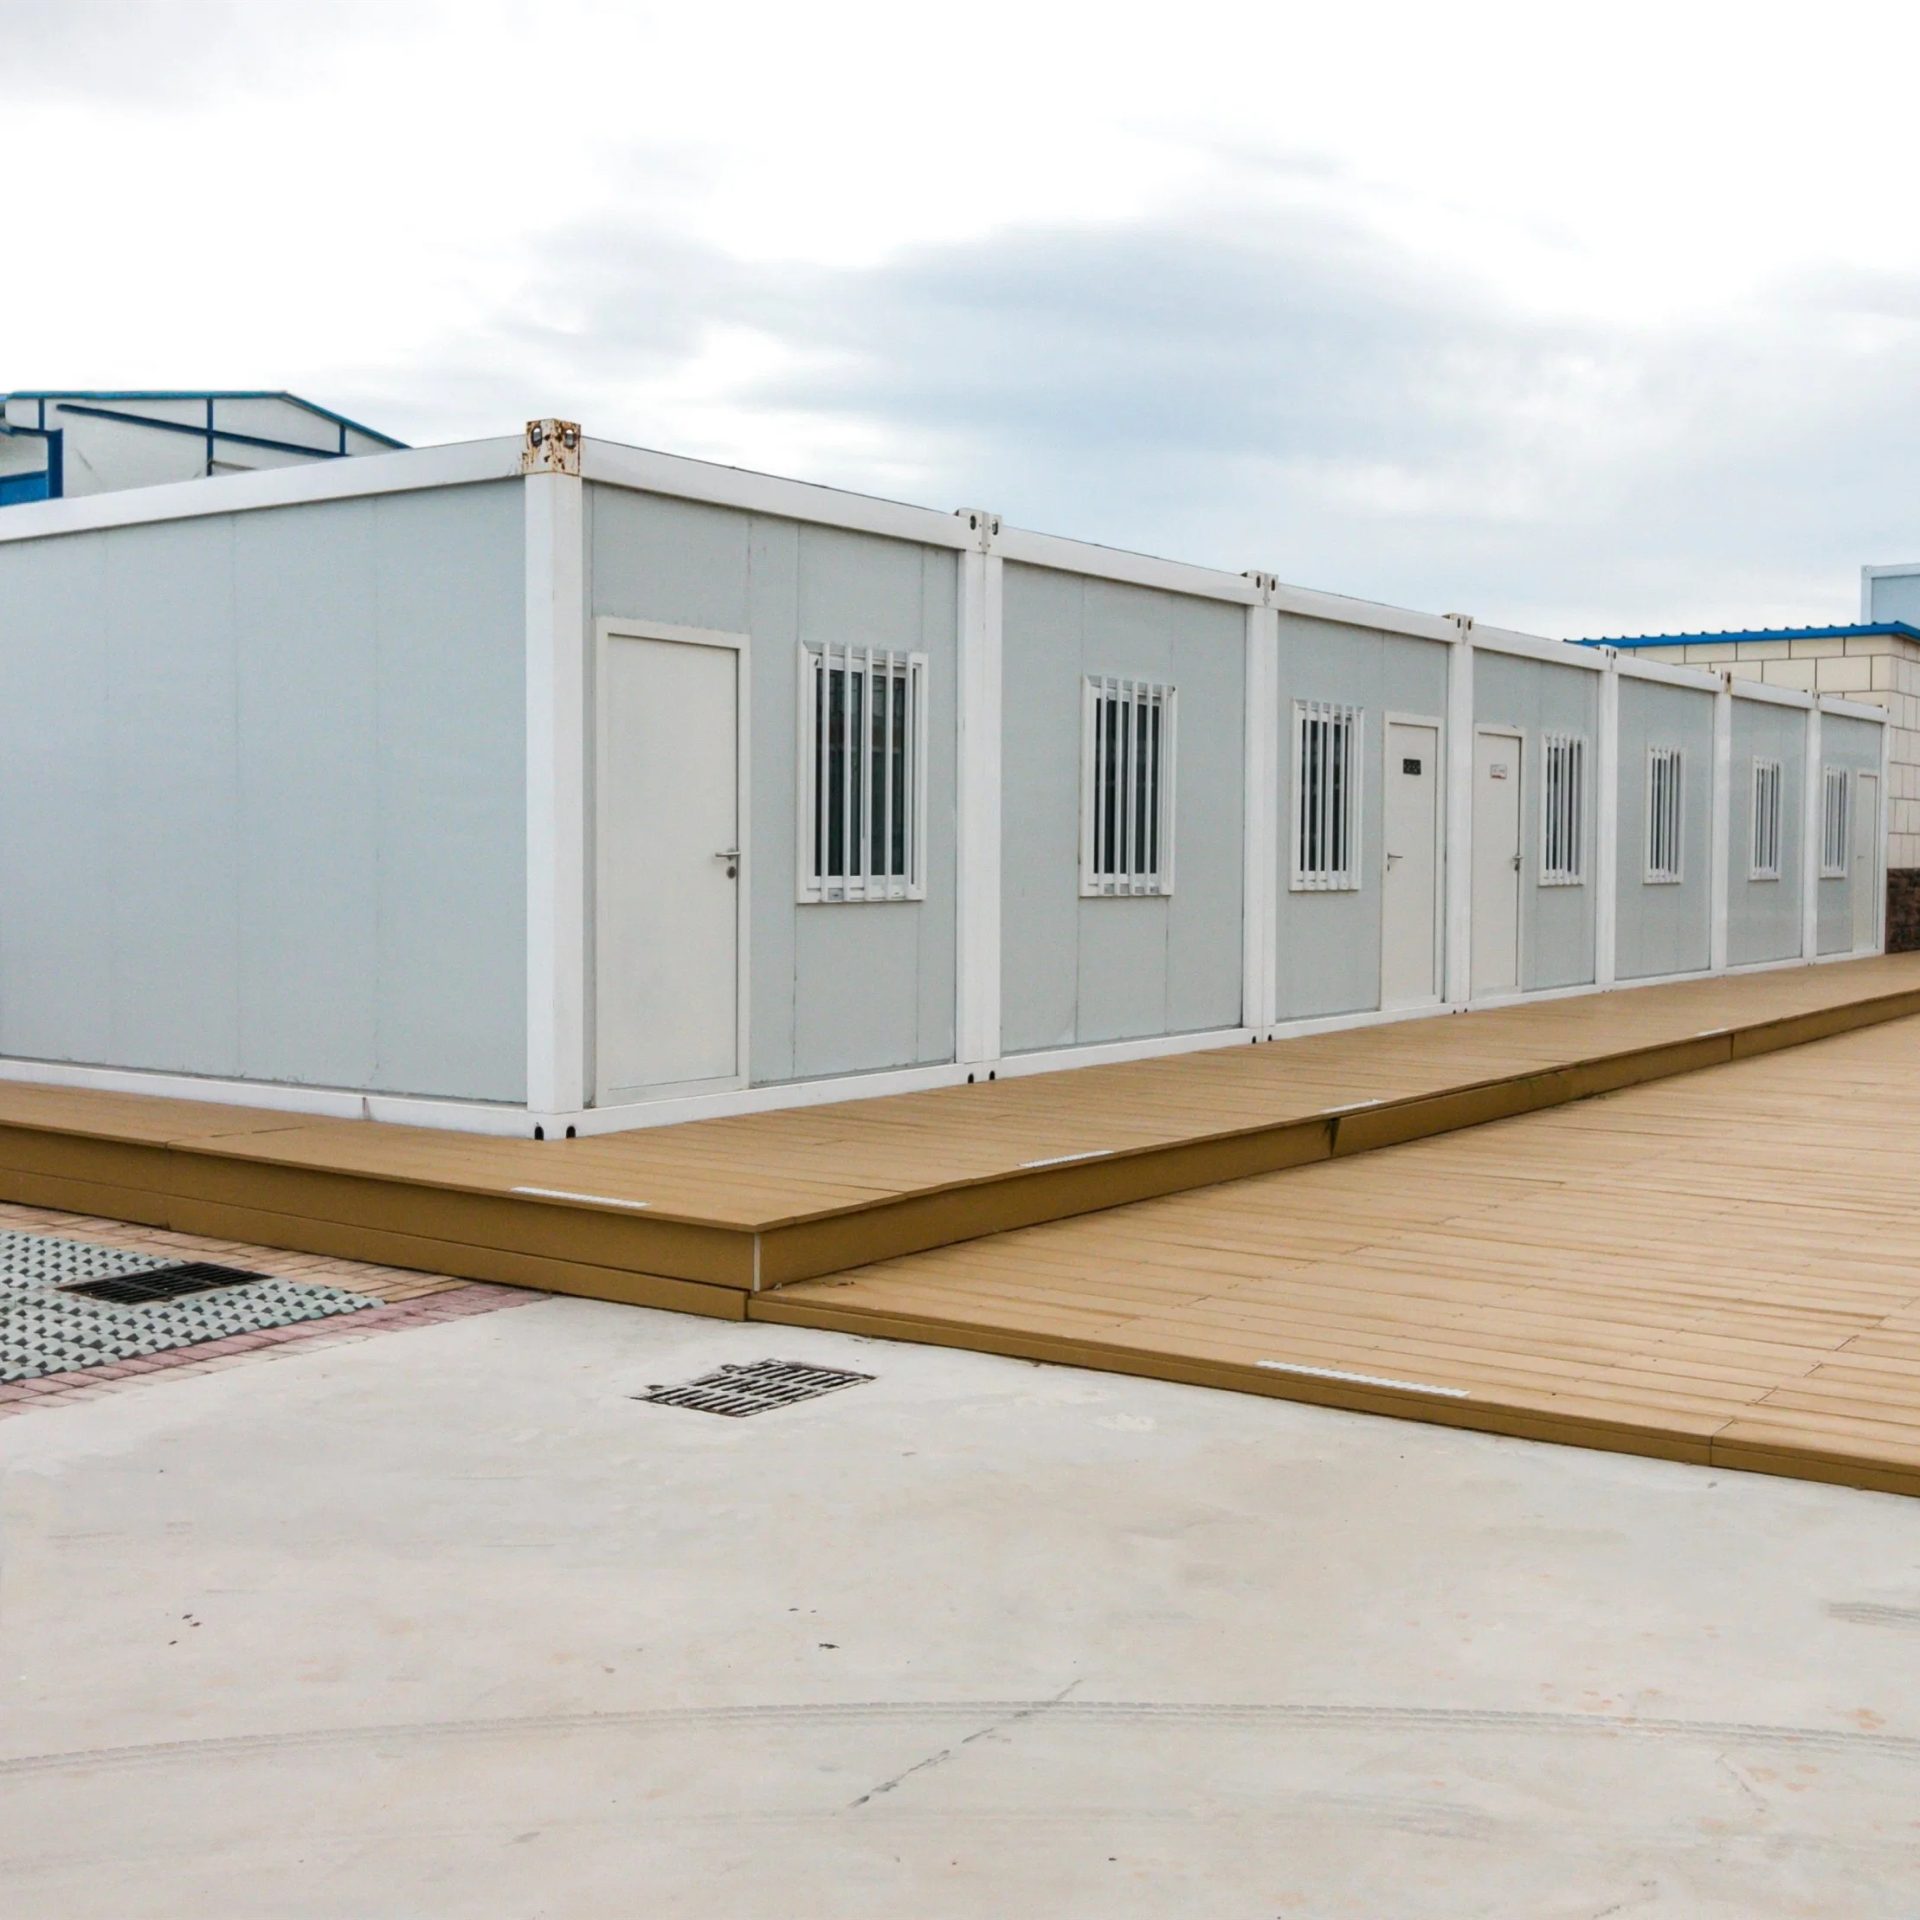 Construction Site Prefab Container Dormitory With Photovoltaic Solar Energy System